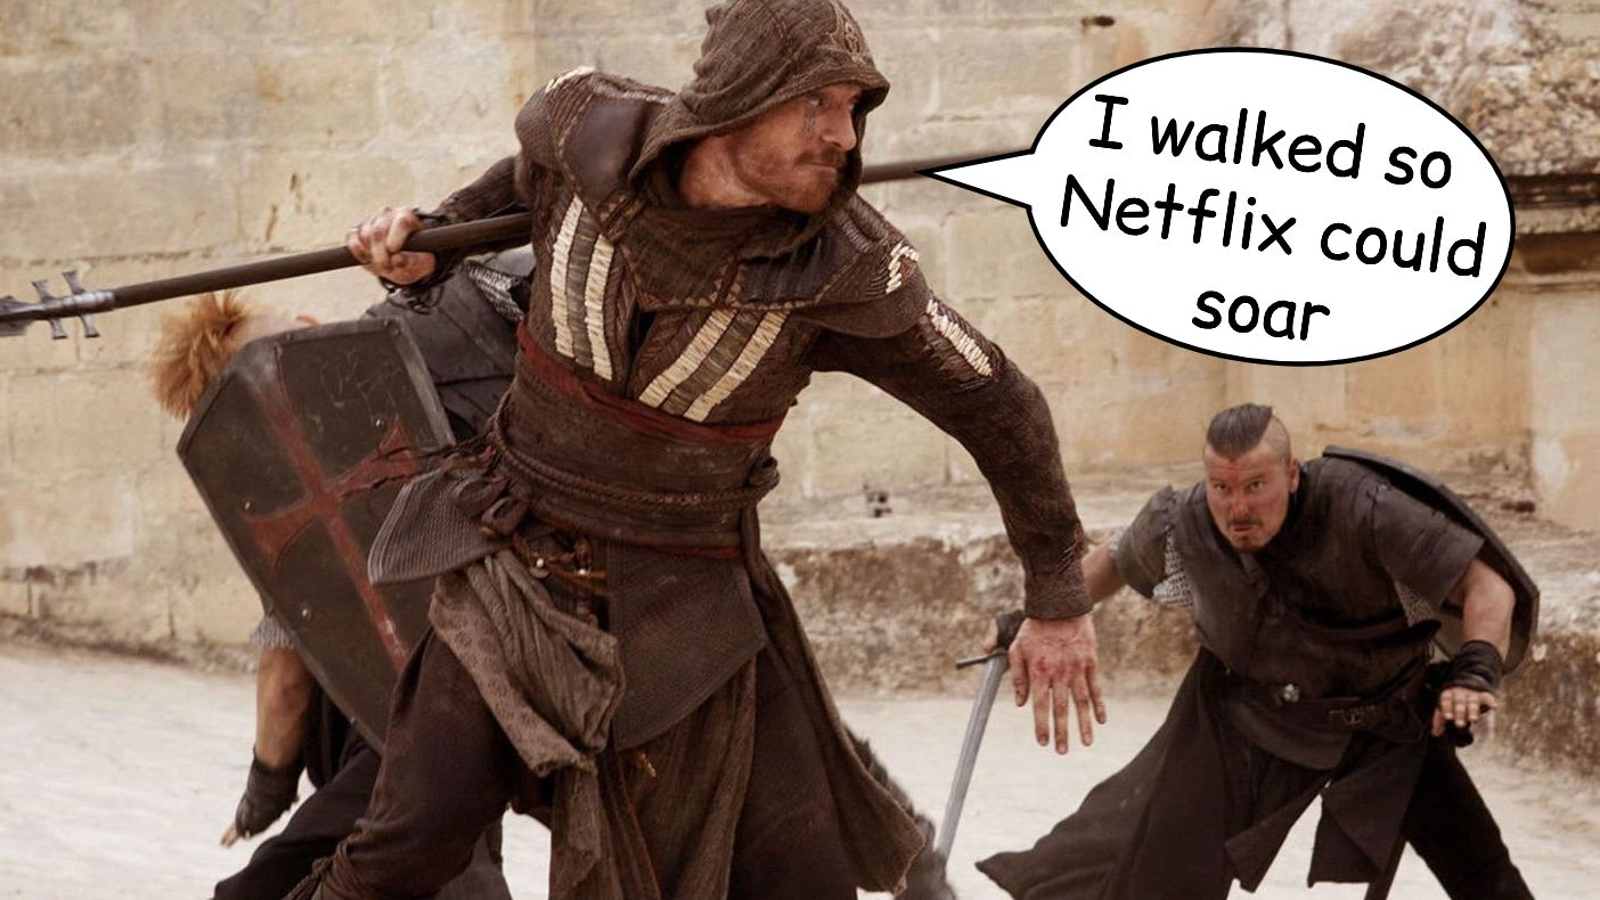 Assassins Creed' Series on Netflix: Everything We Know So Far